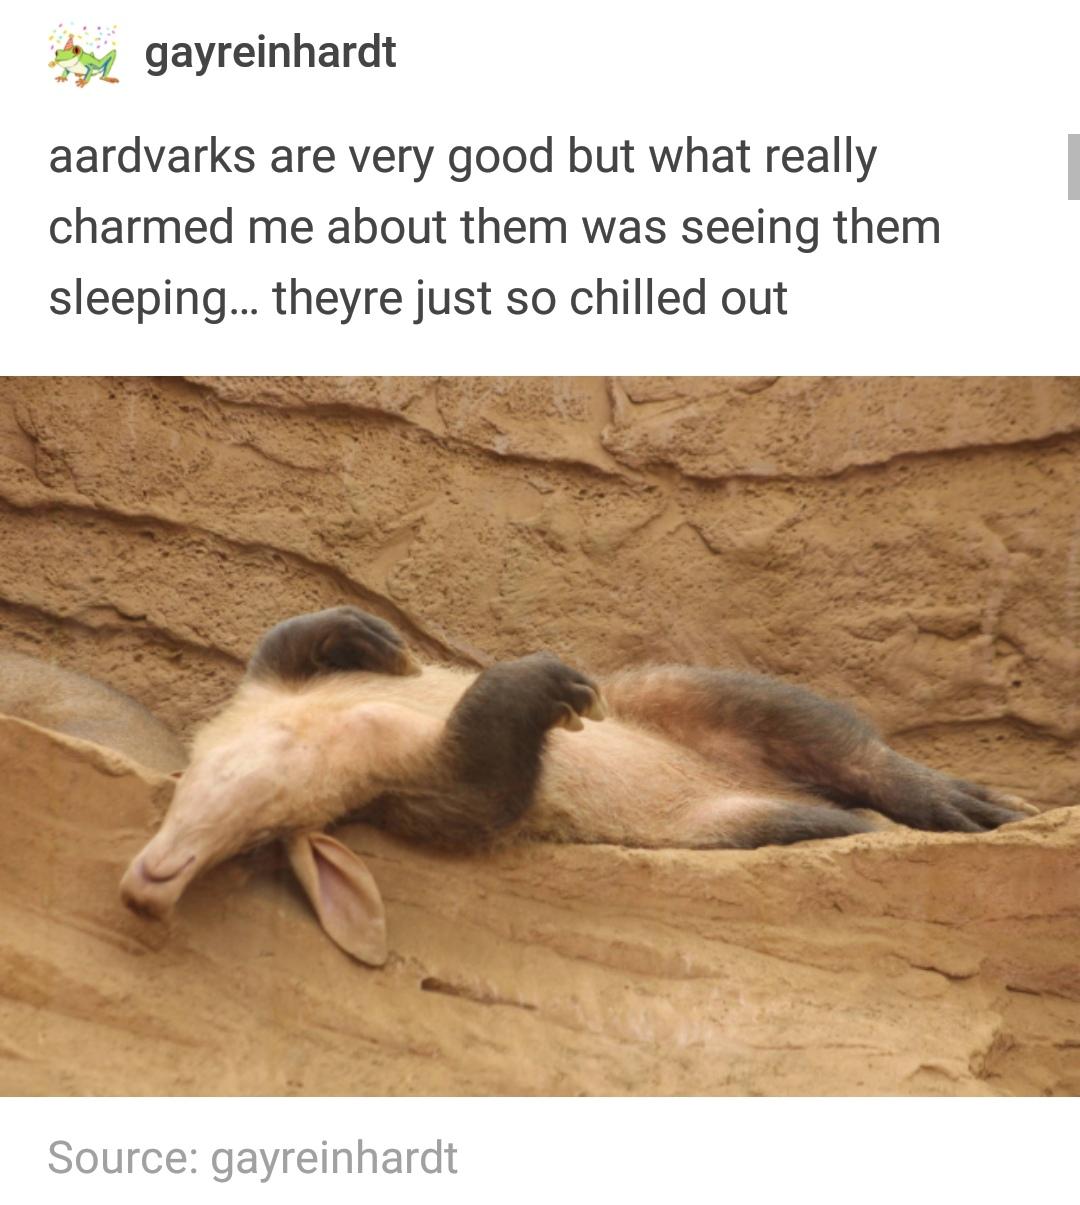 Aardvarks and chill?